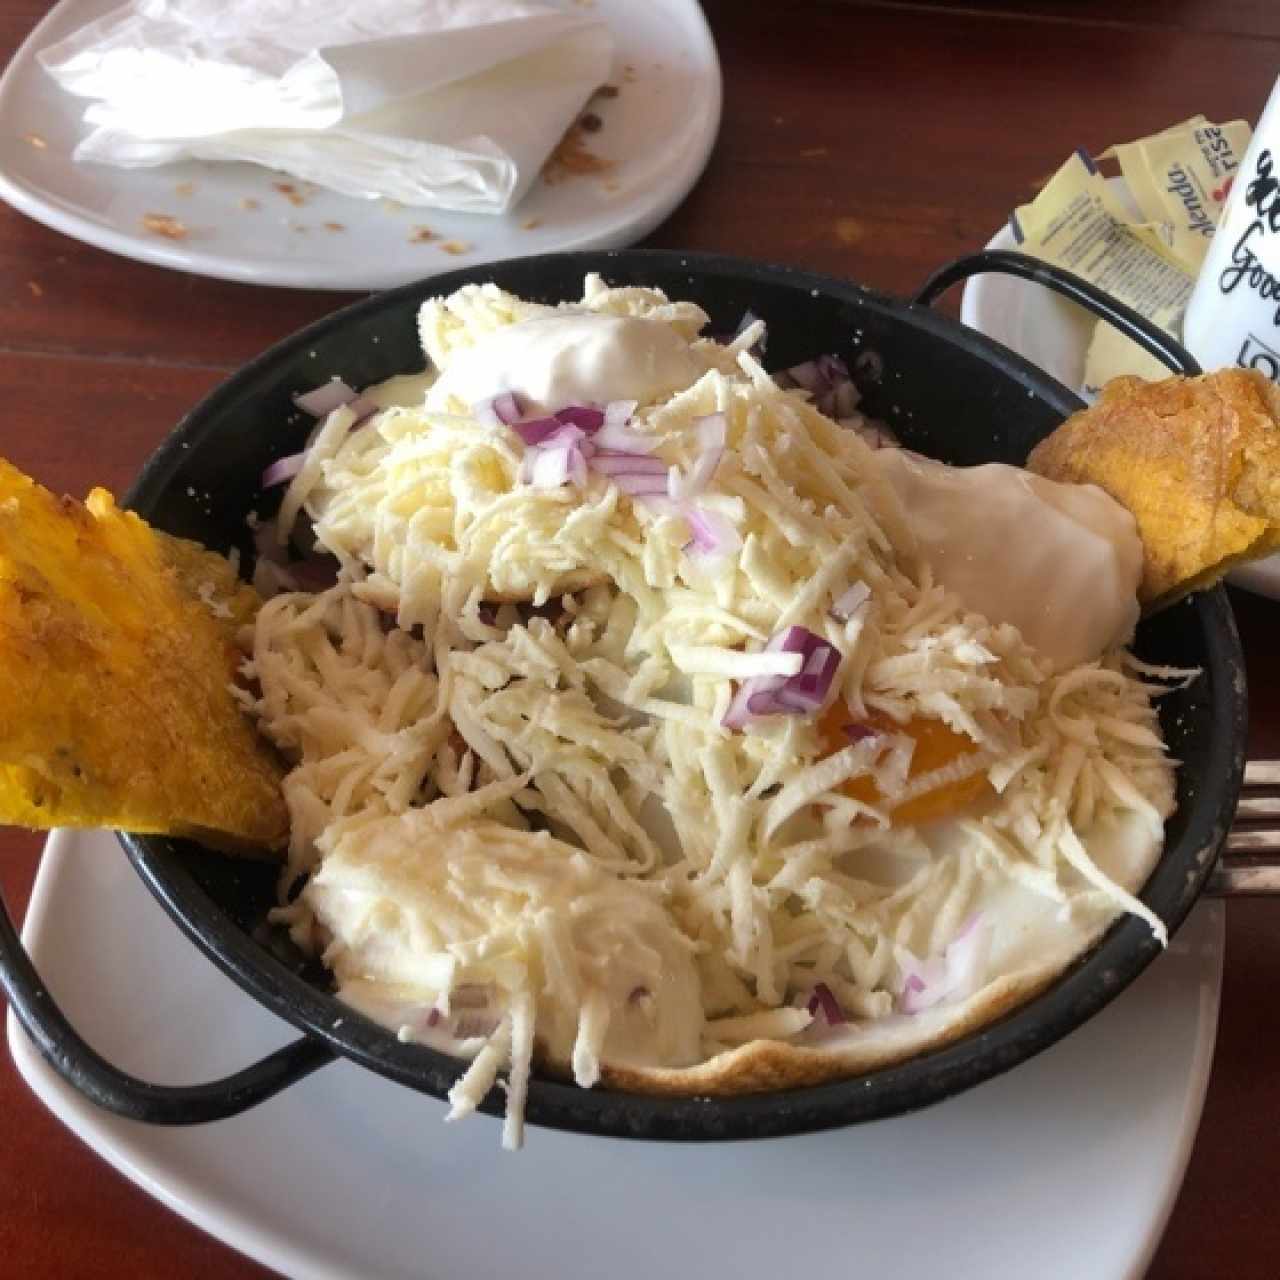 Chilaquiles panameños